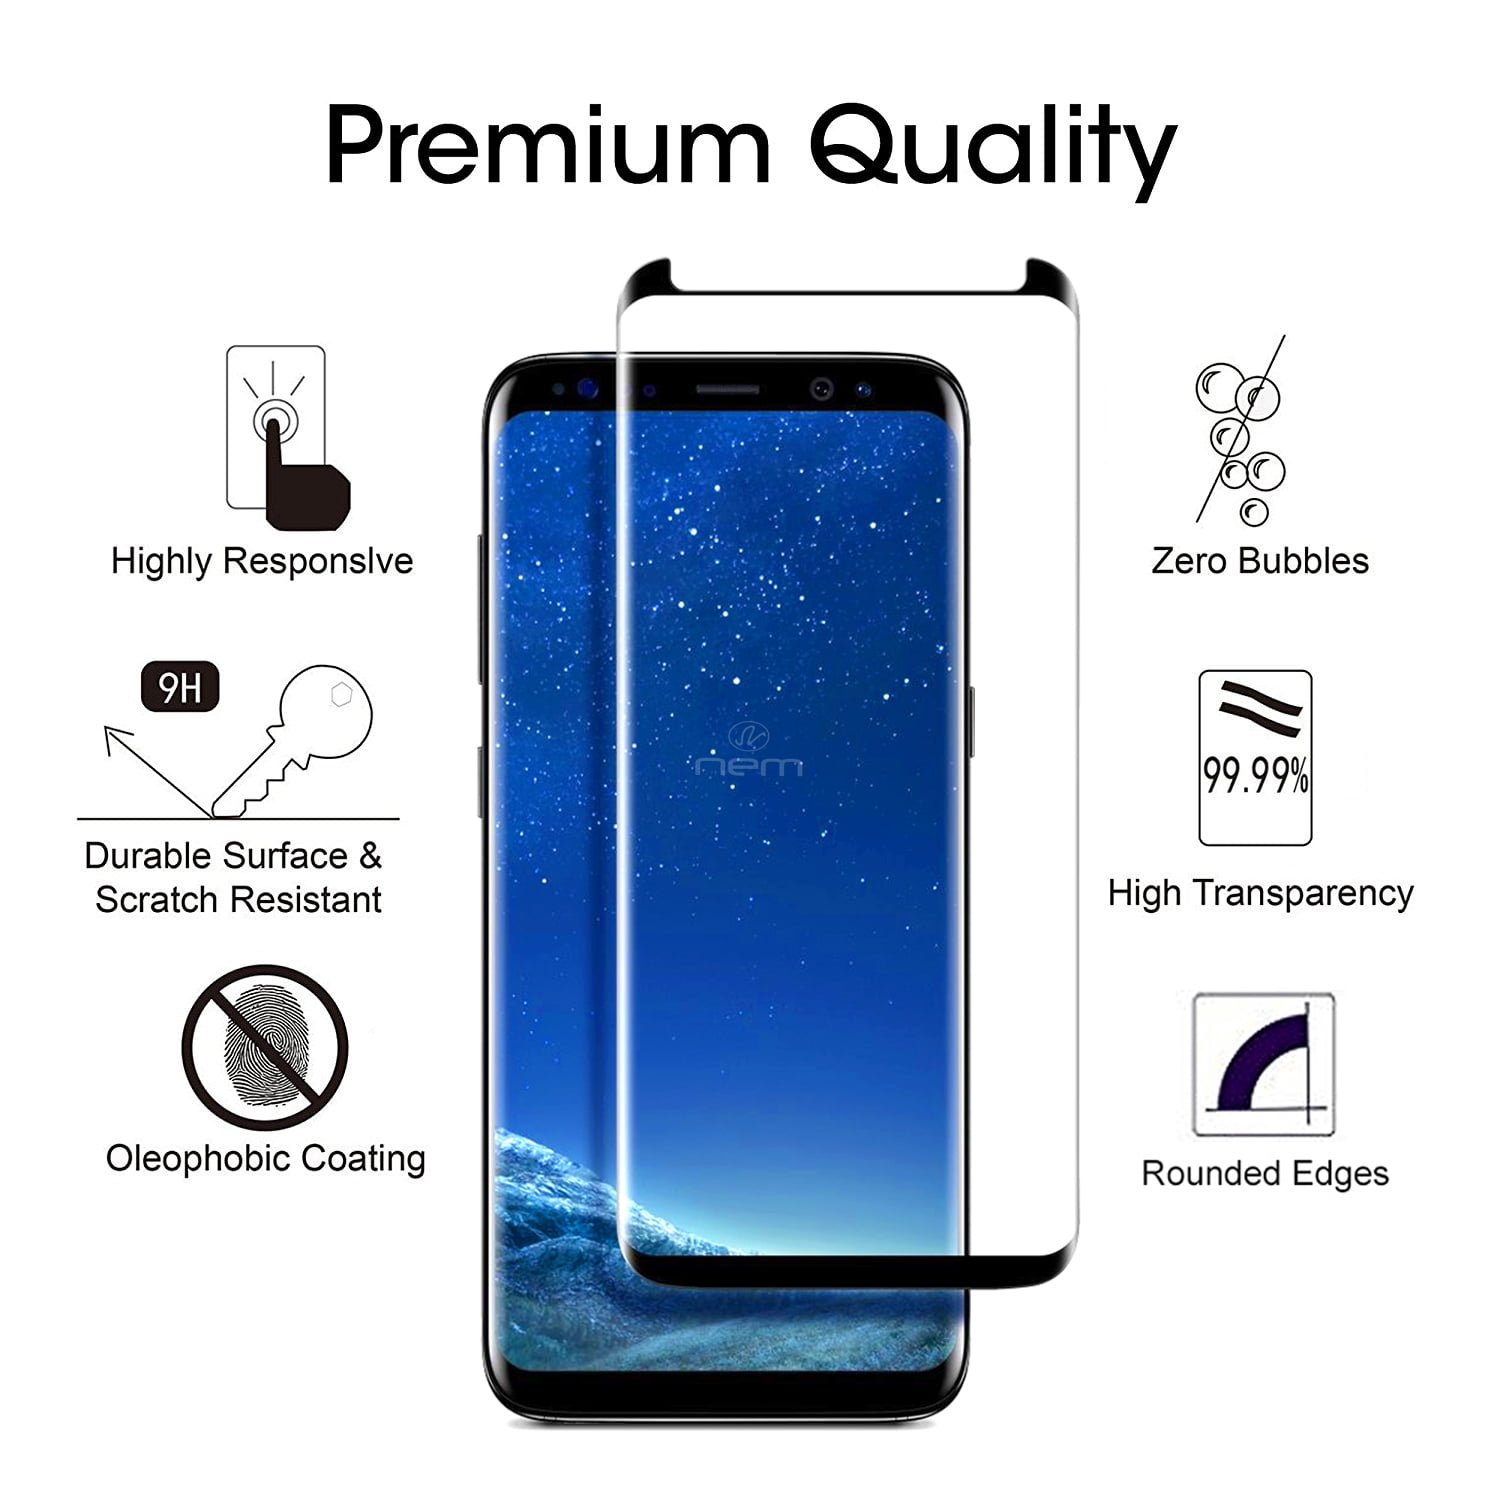 【2 Pack】Galaxy S8 Screen Protector Full Coverage Bubble-Free 9H Scratch-Resistant HD Clear 3D Curved Dot Matrix Tempered Glass Screen Protector for Samsung S8 